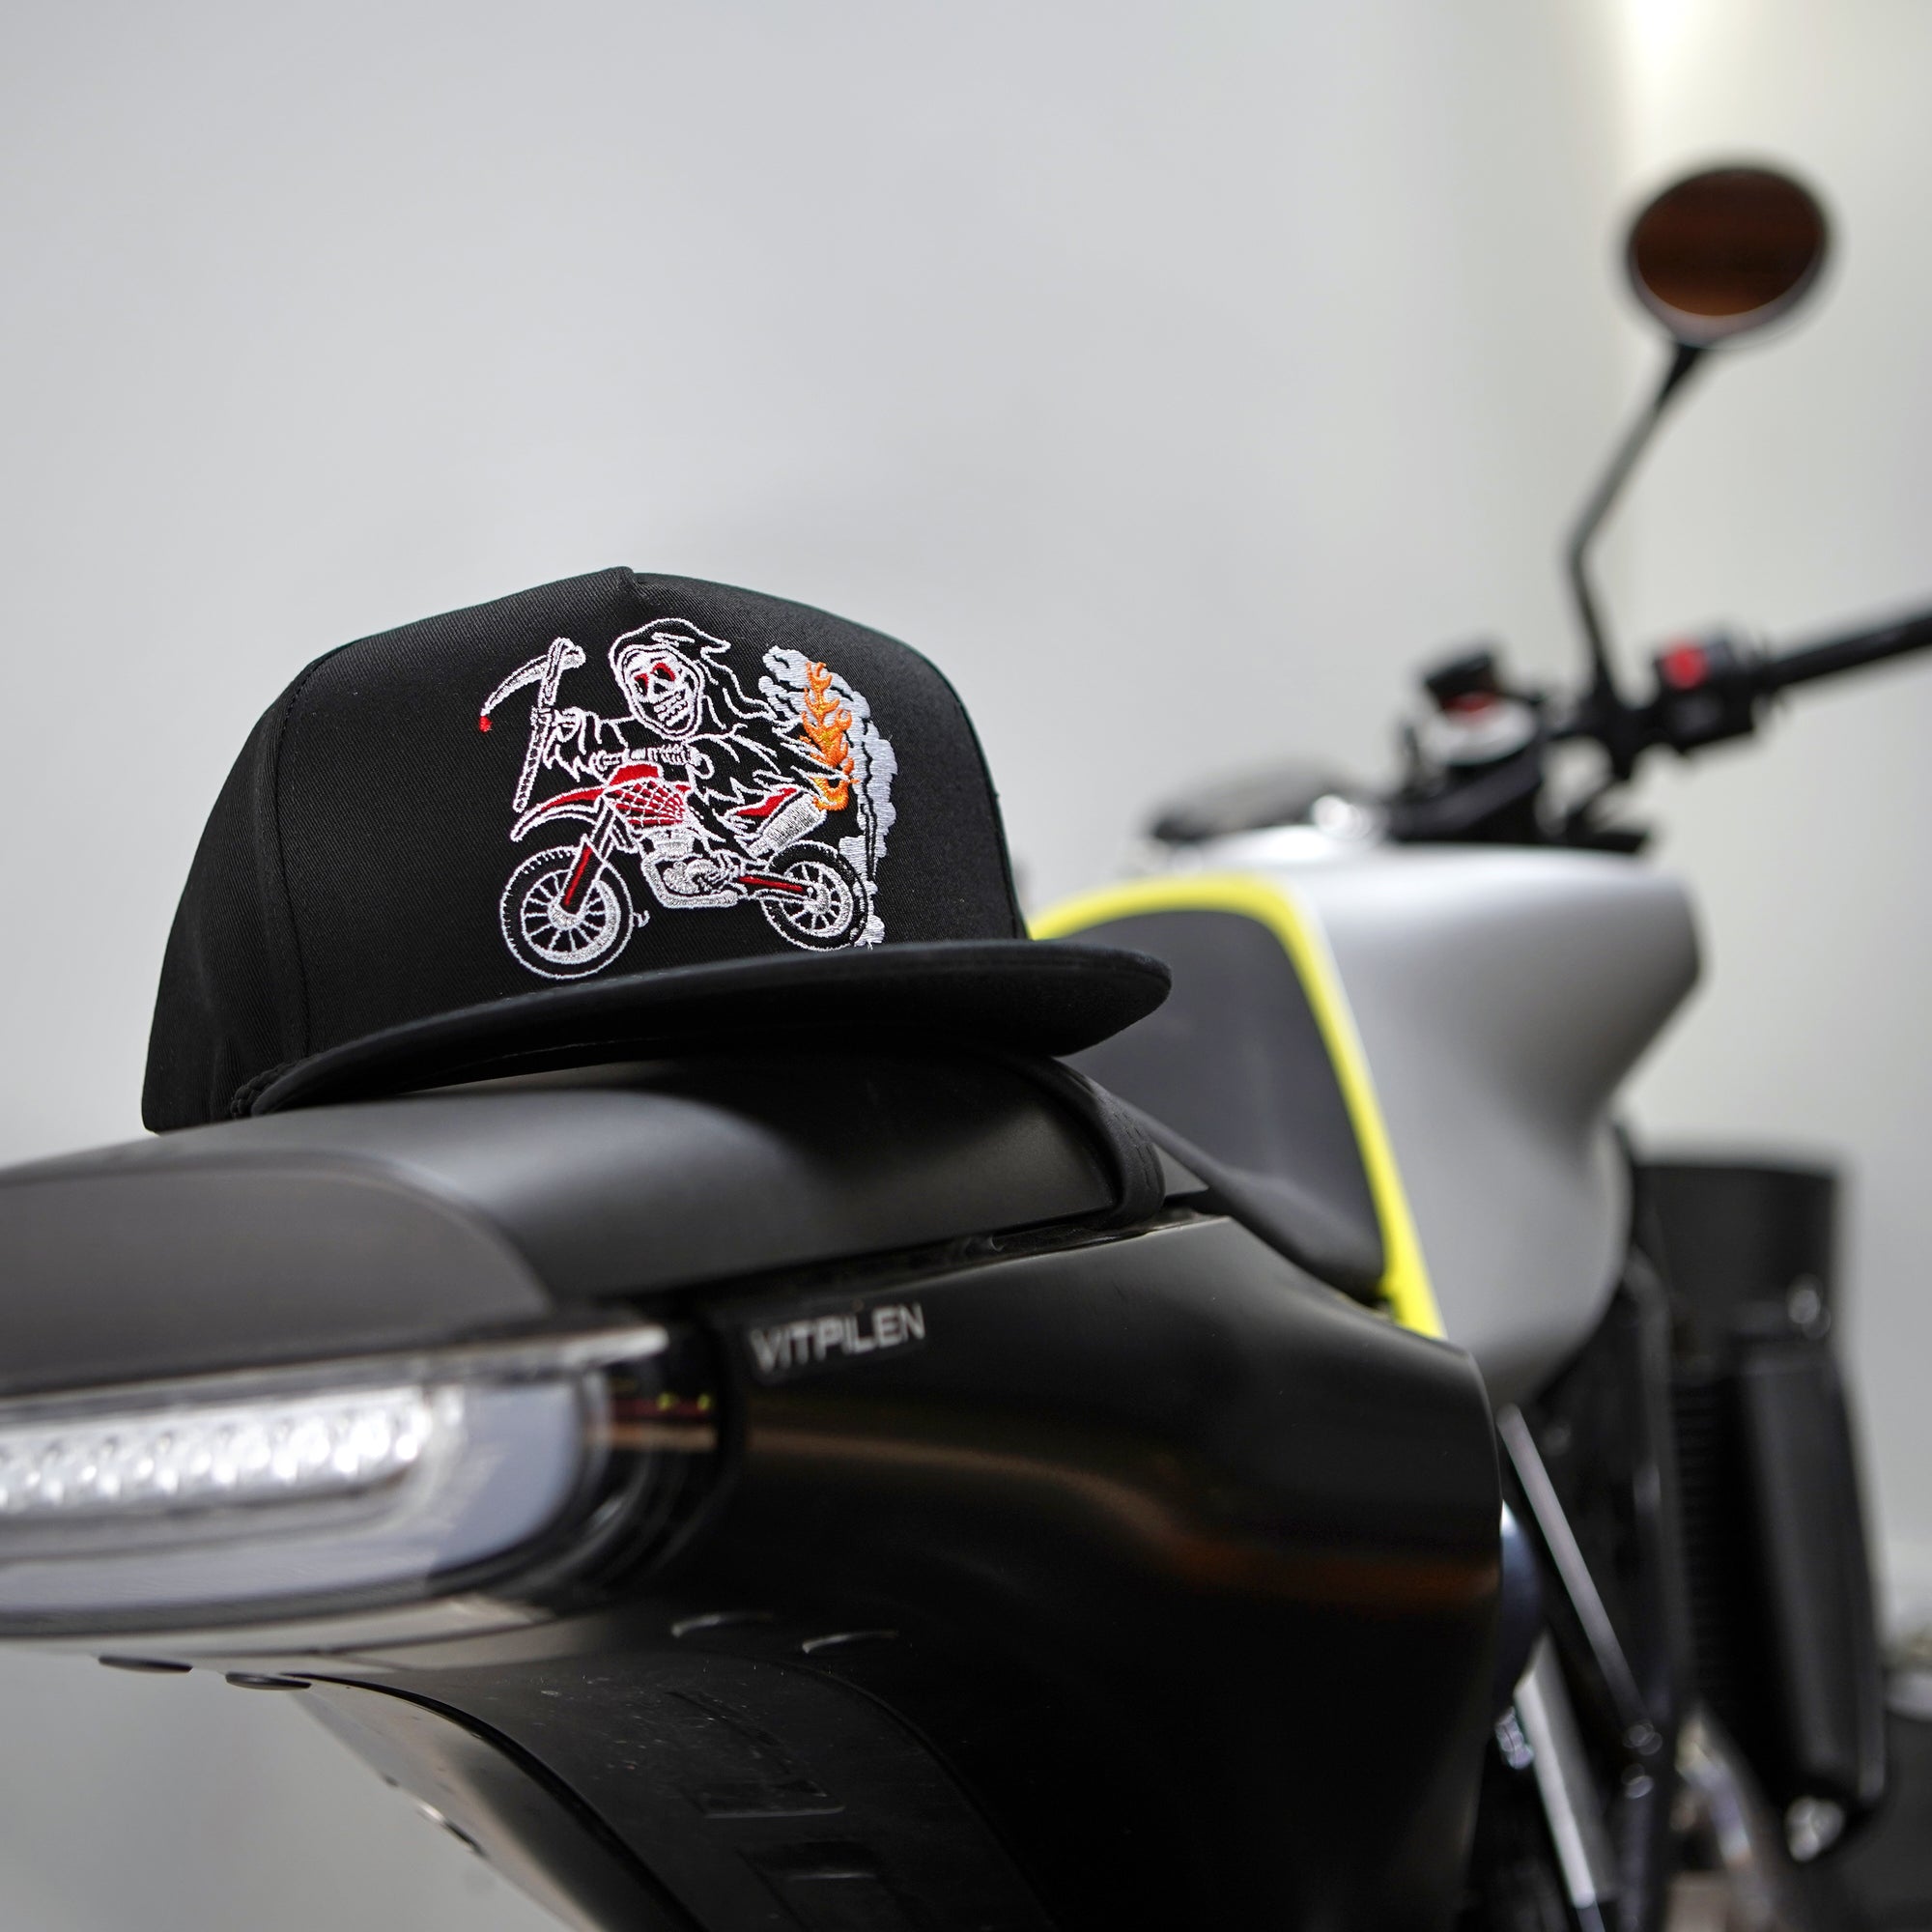 Must Go Faster Motorcycle Cap